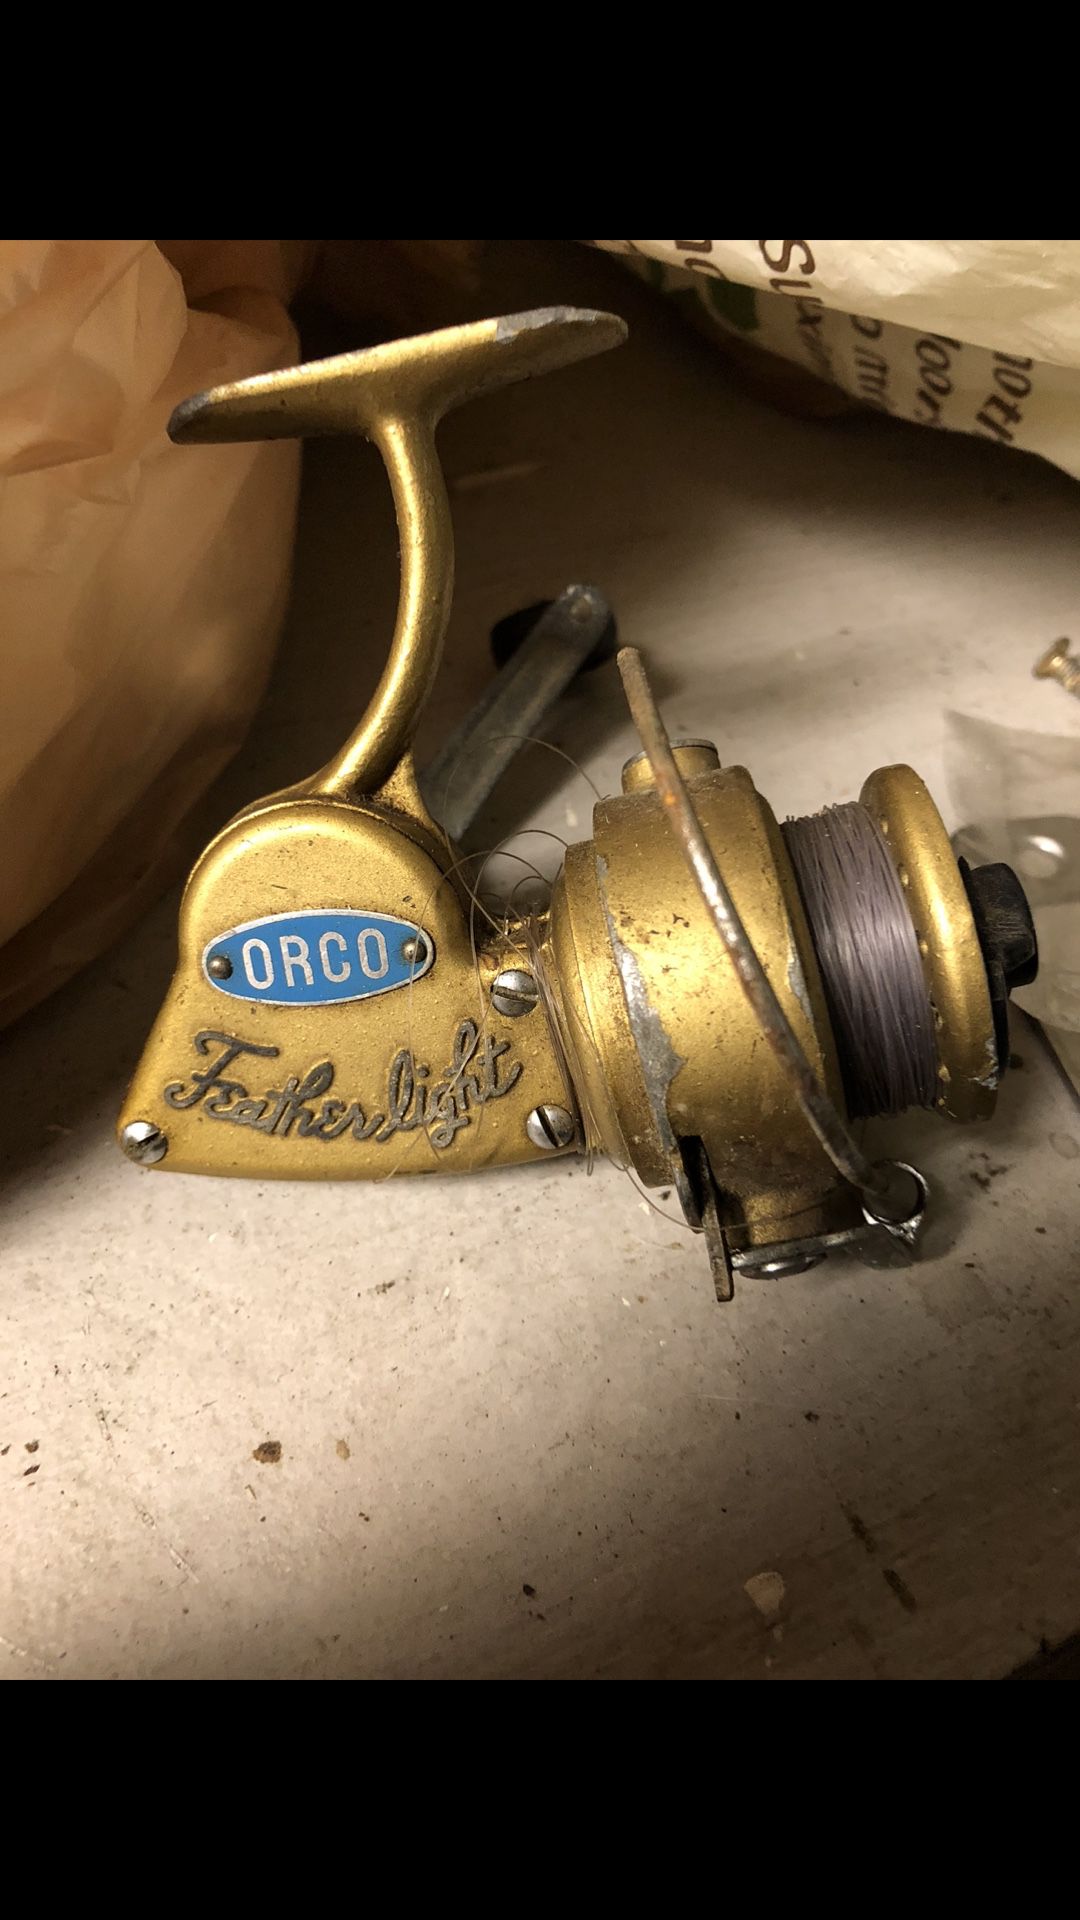 Orco Light Weight Fishing Reel